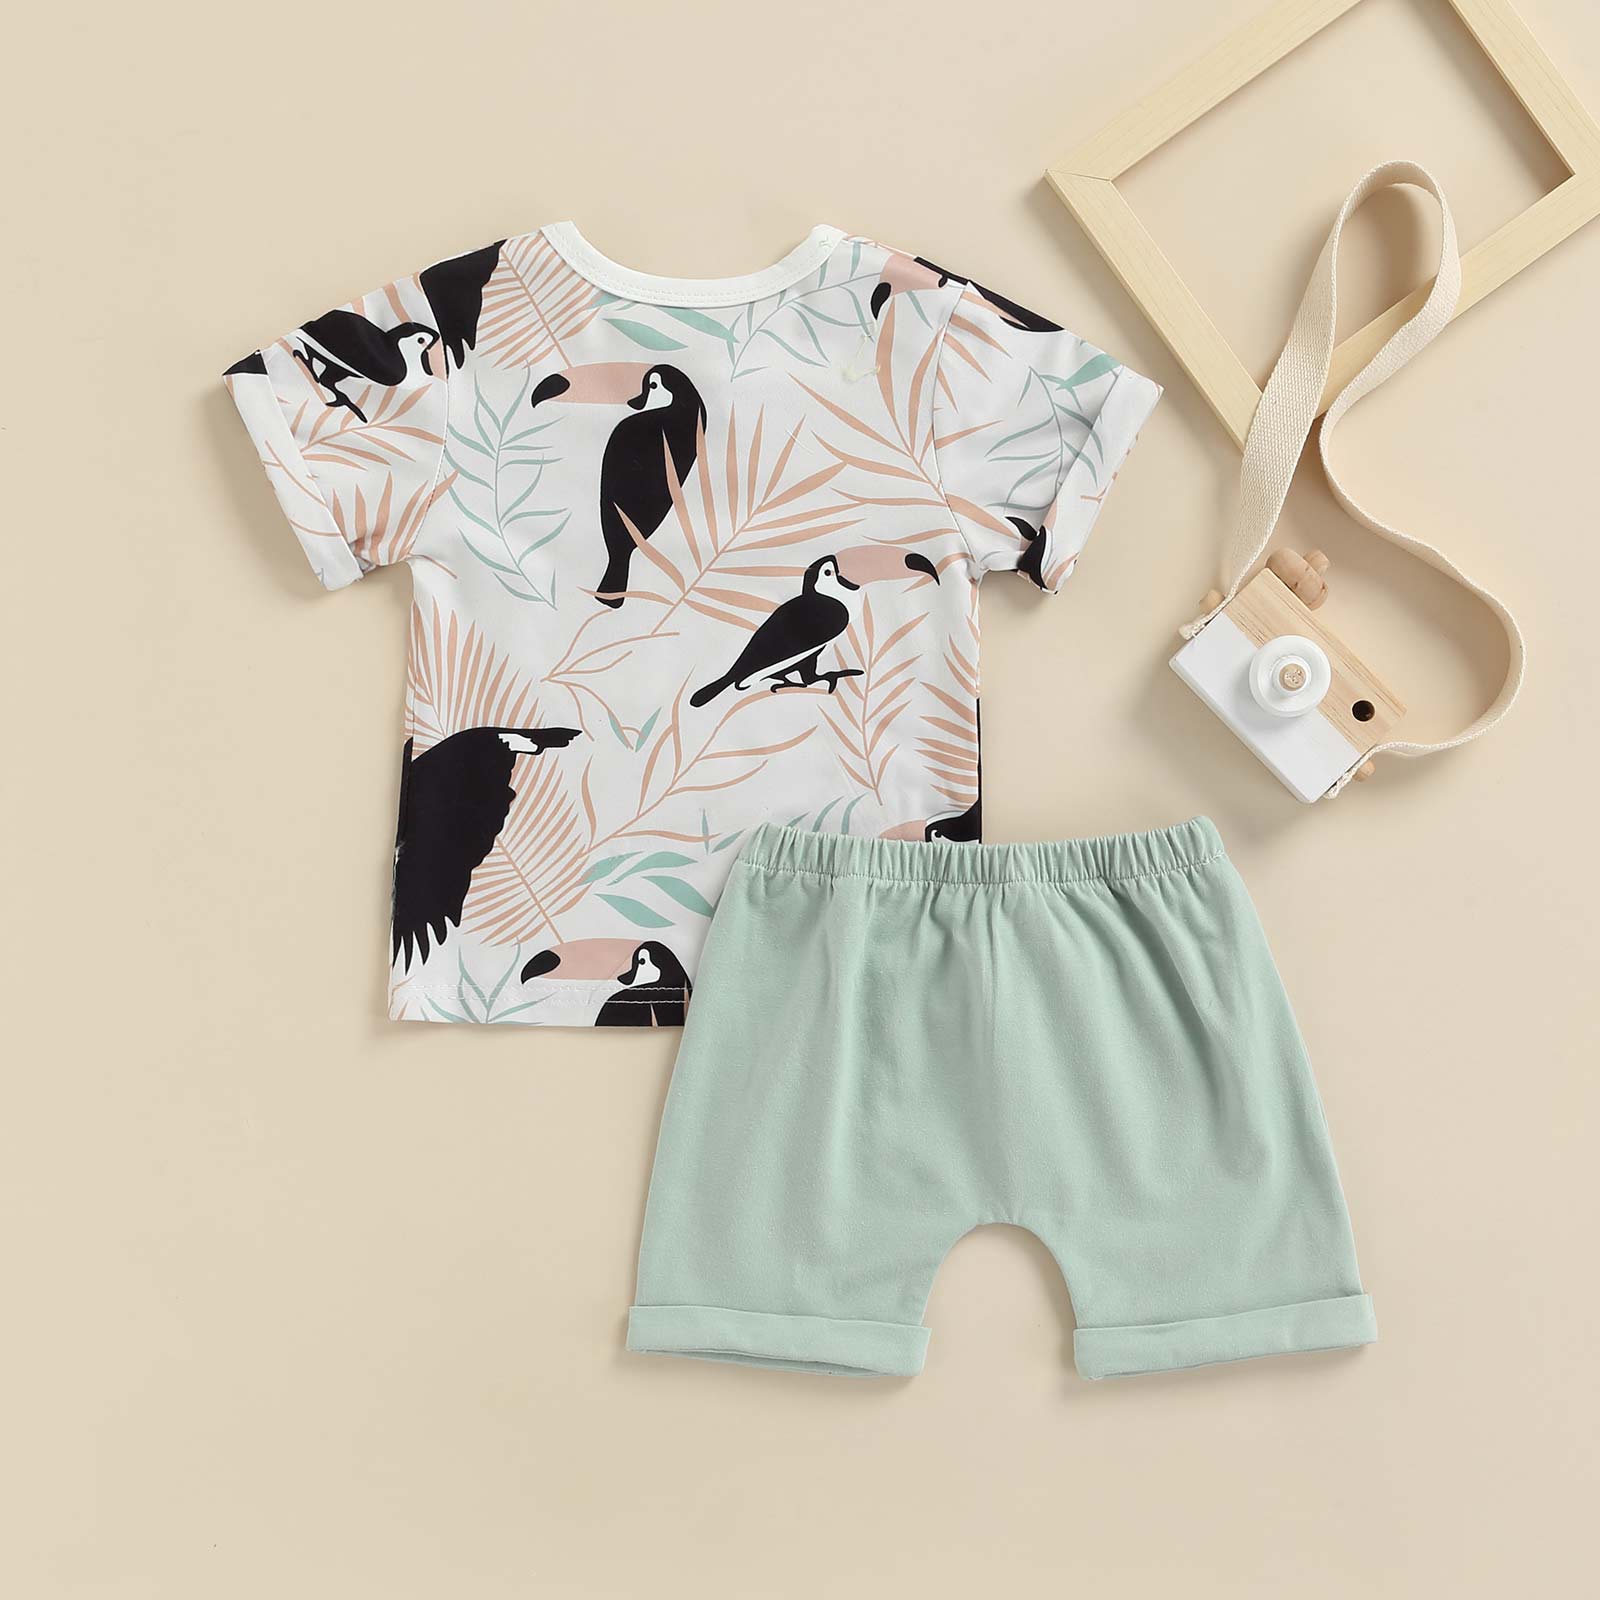 Fly Toucans Fly Short Set